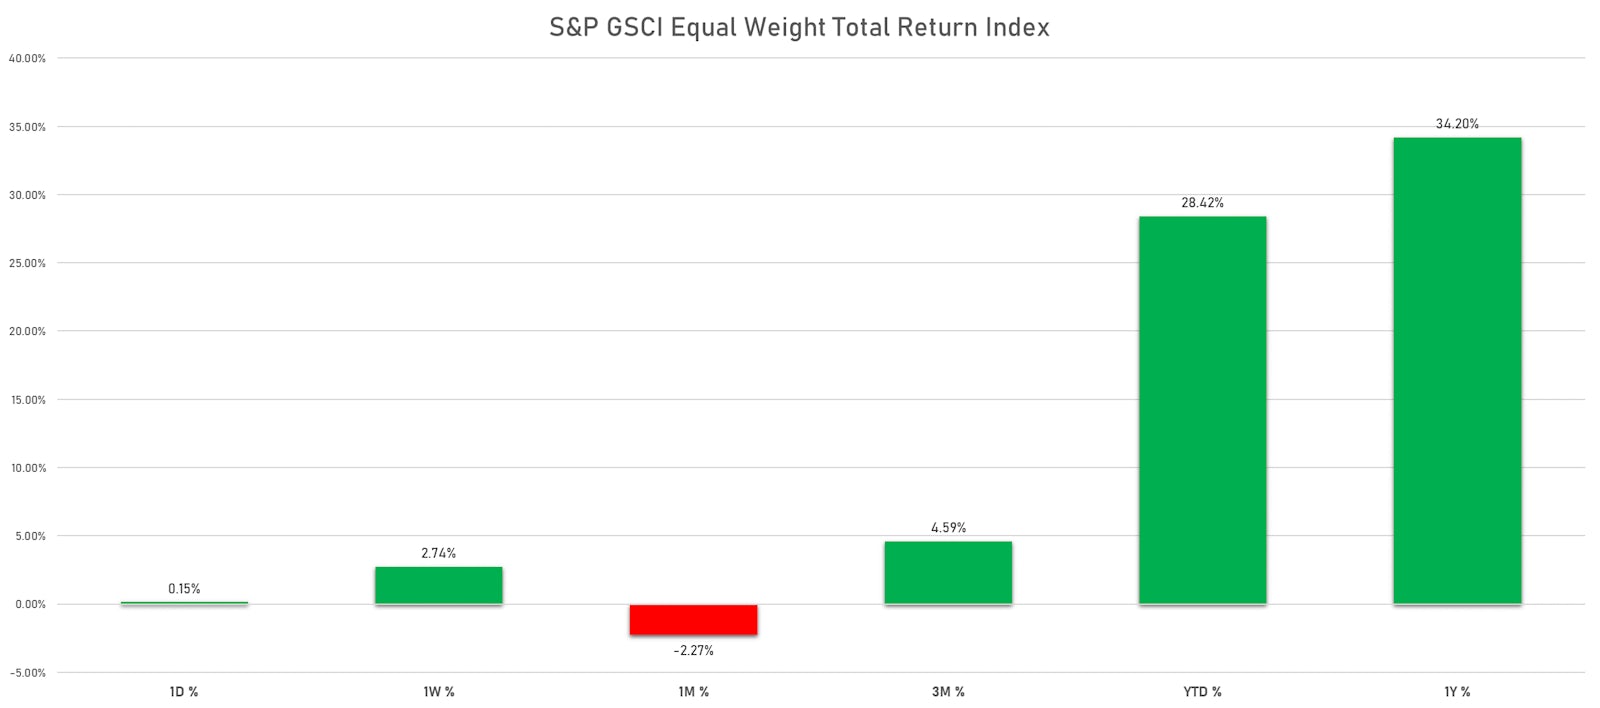 Performance Of The S&P GSCI Equal Weight Total Return Index | Sources: ϕpost, FactSet data